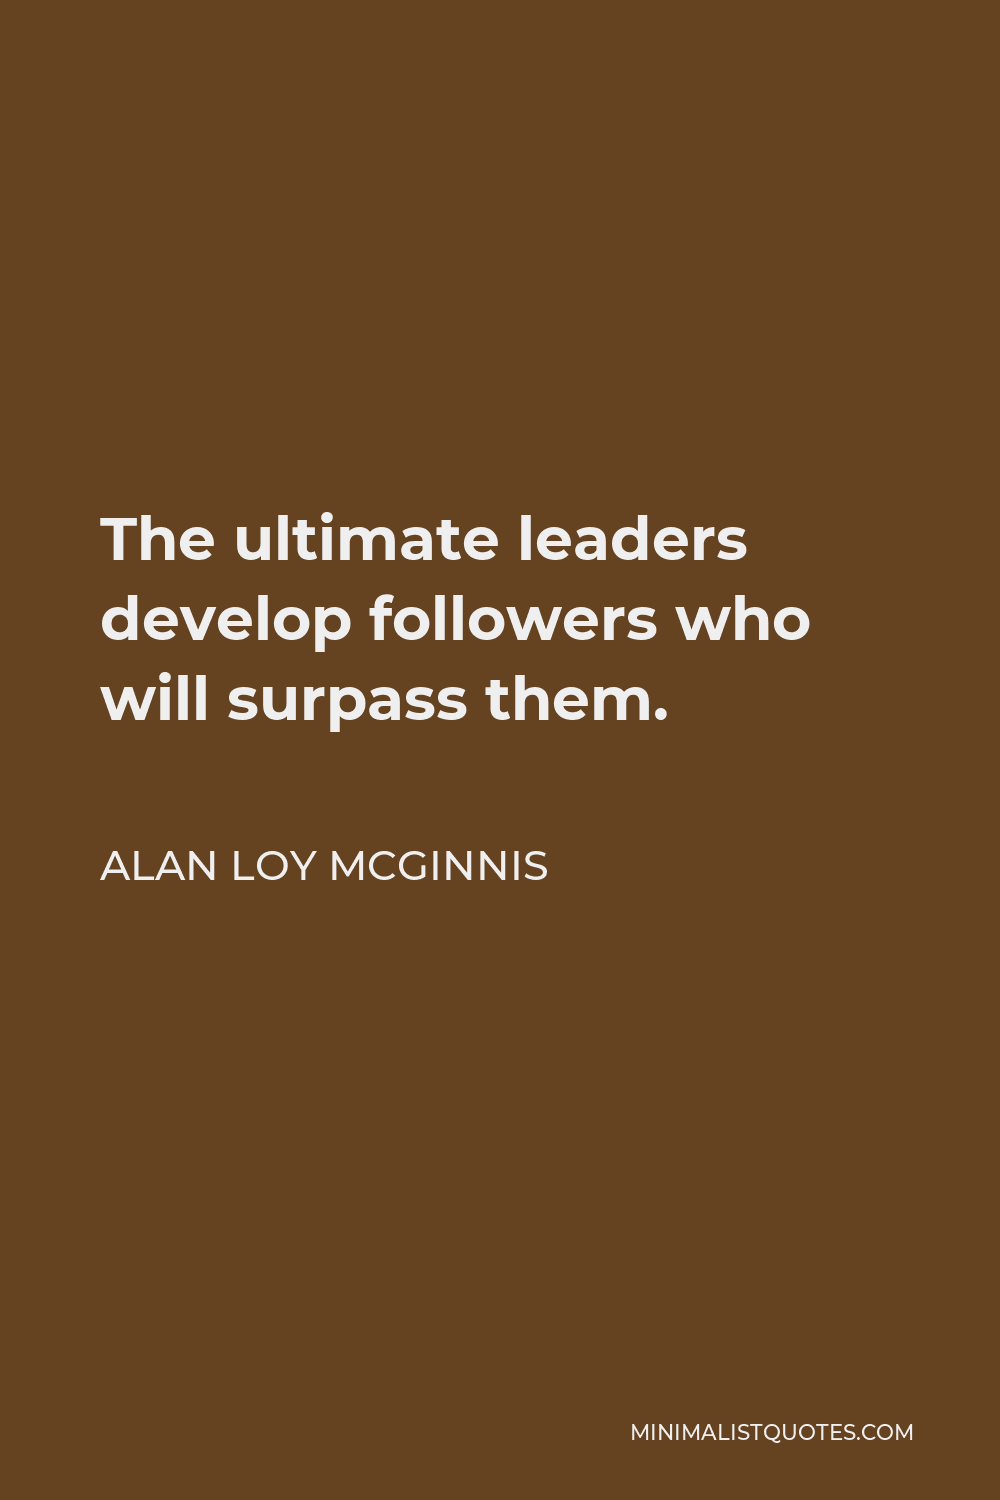 Alan Loy McGinnis Quote - The ultimate leaders develop followers who will surpass them.